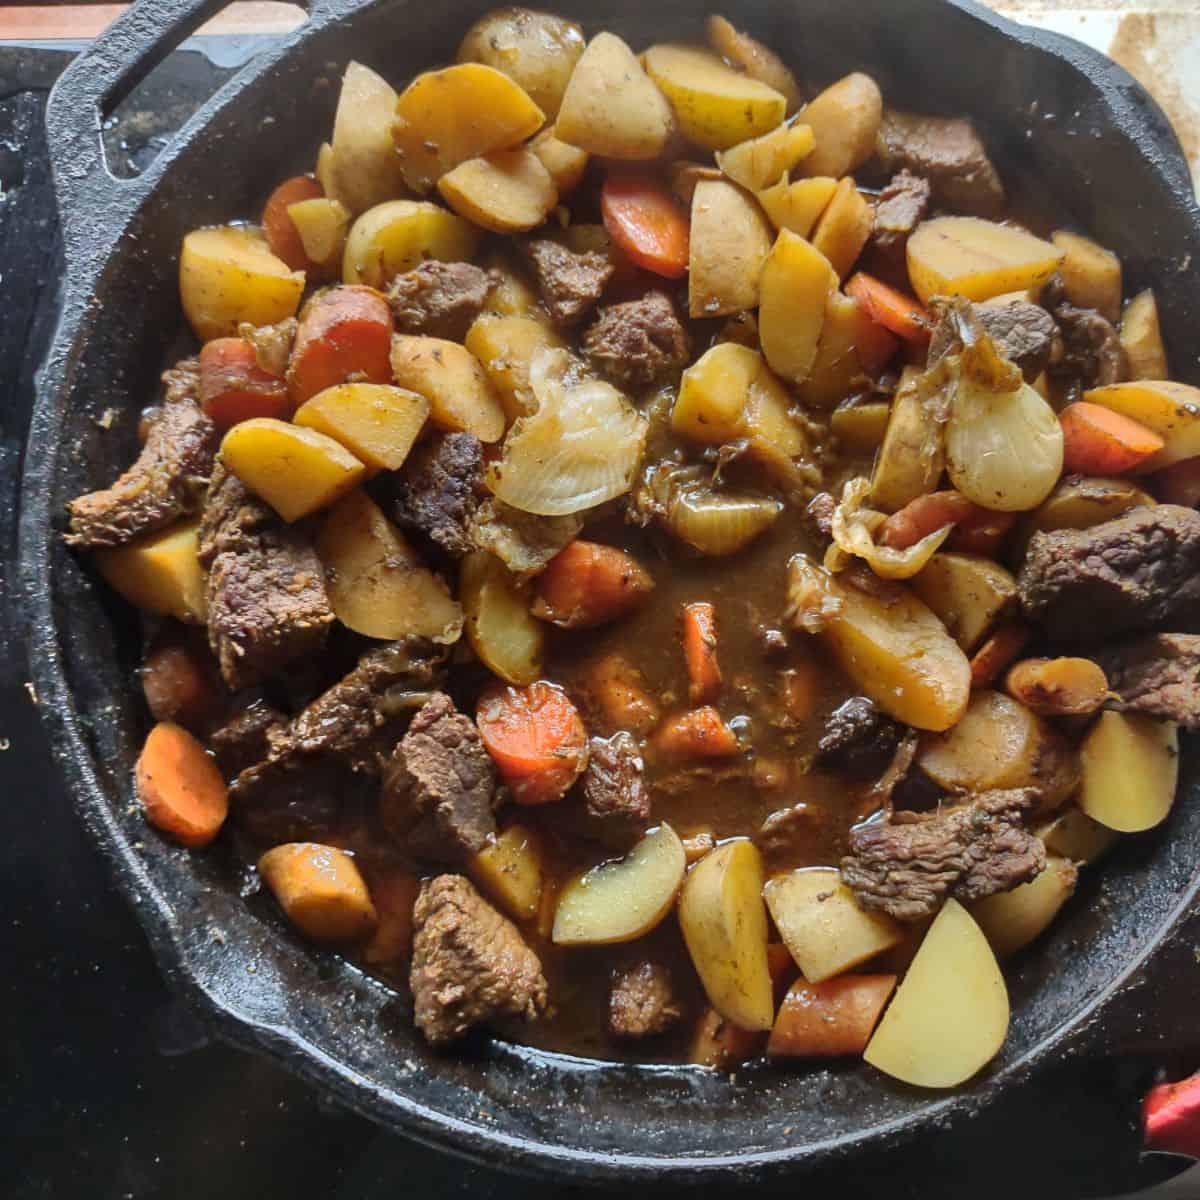 A finished beef stew with carrots, potatoes, and pearl onions.